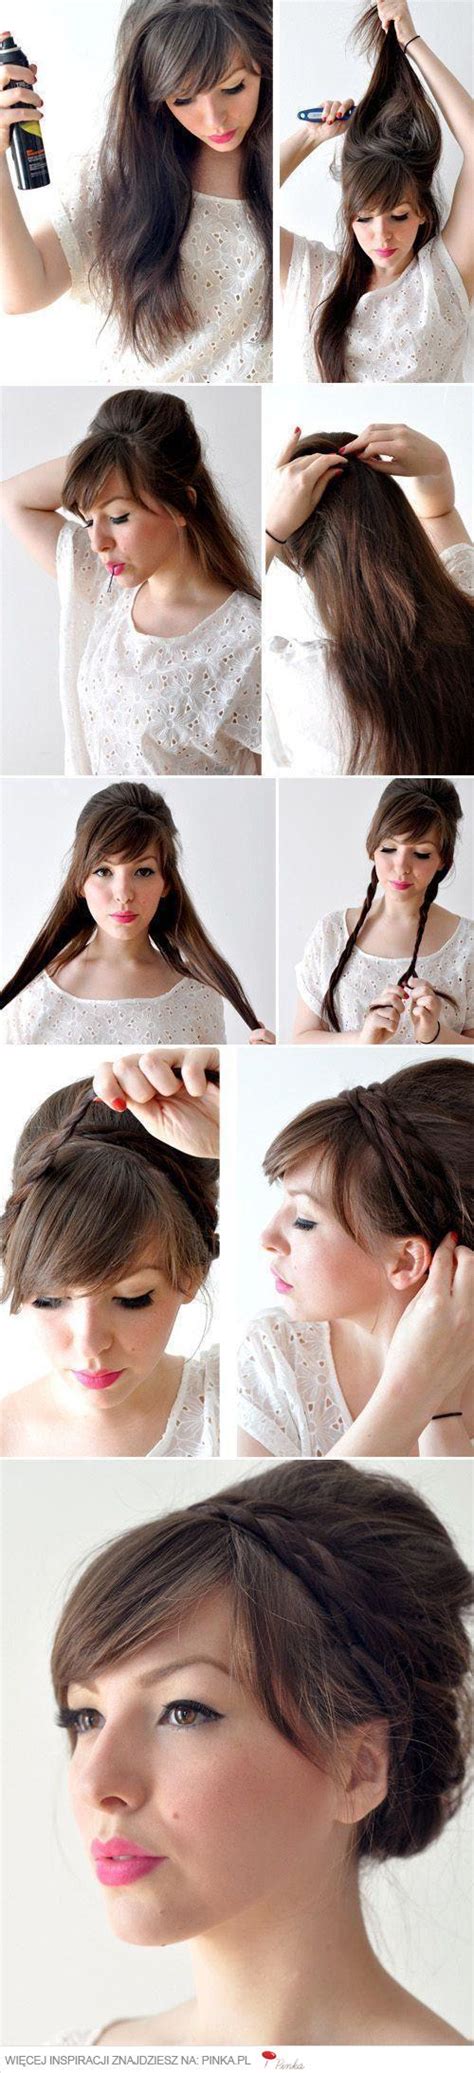 lovely   hairstyle tutorials